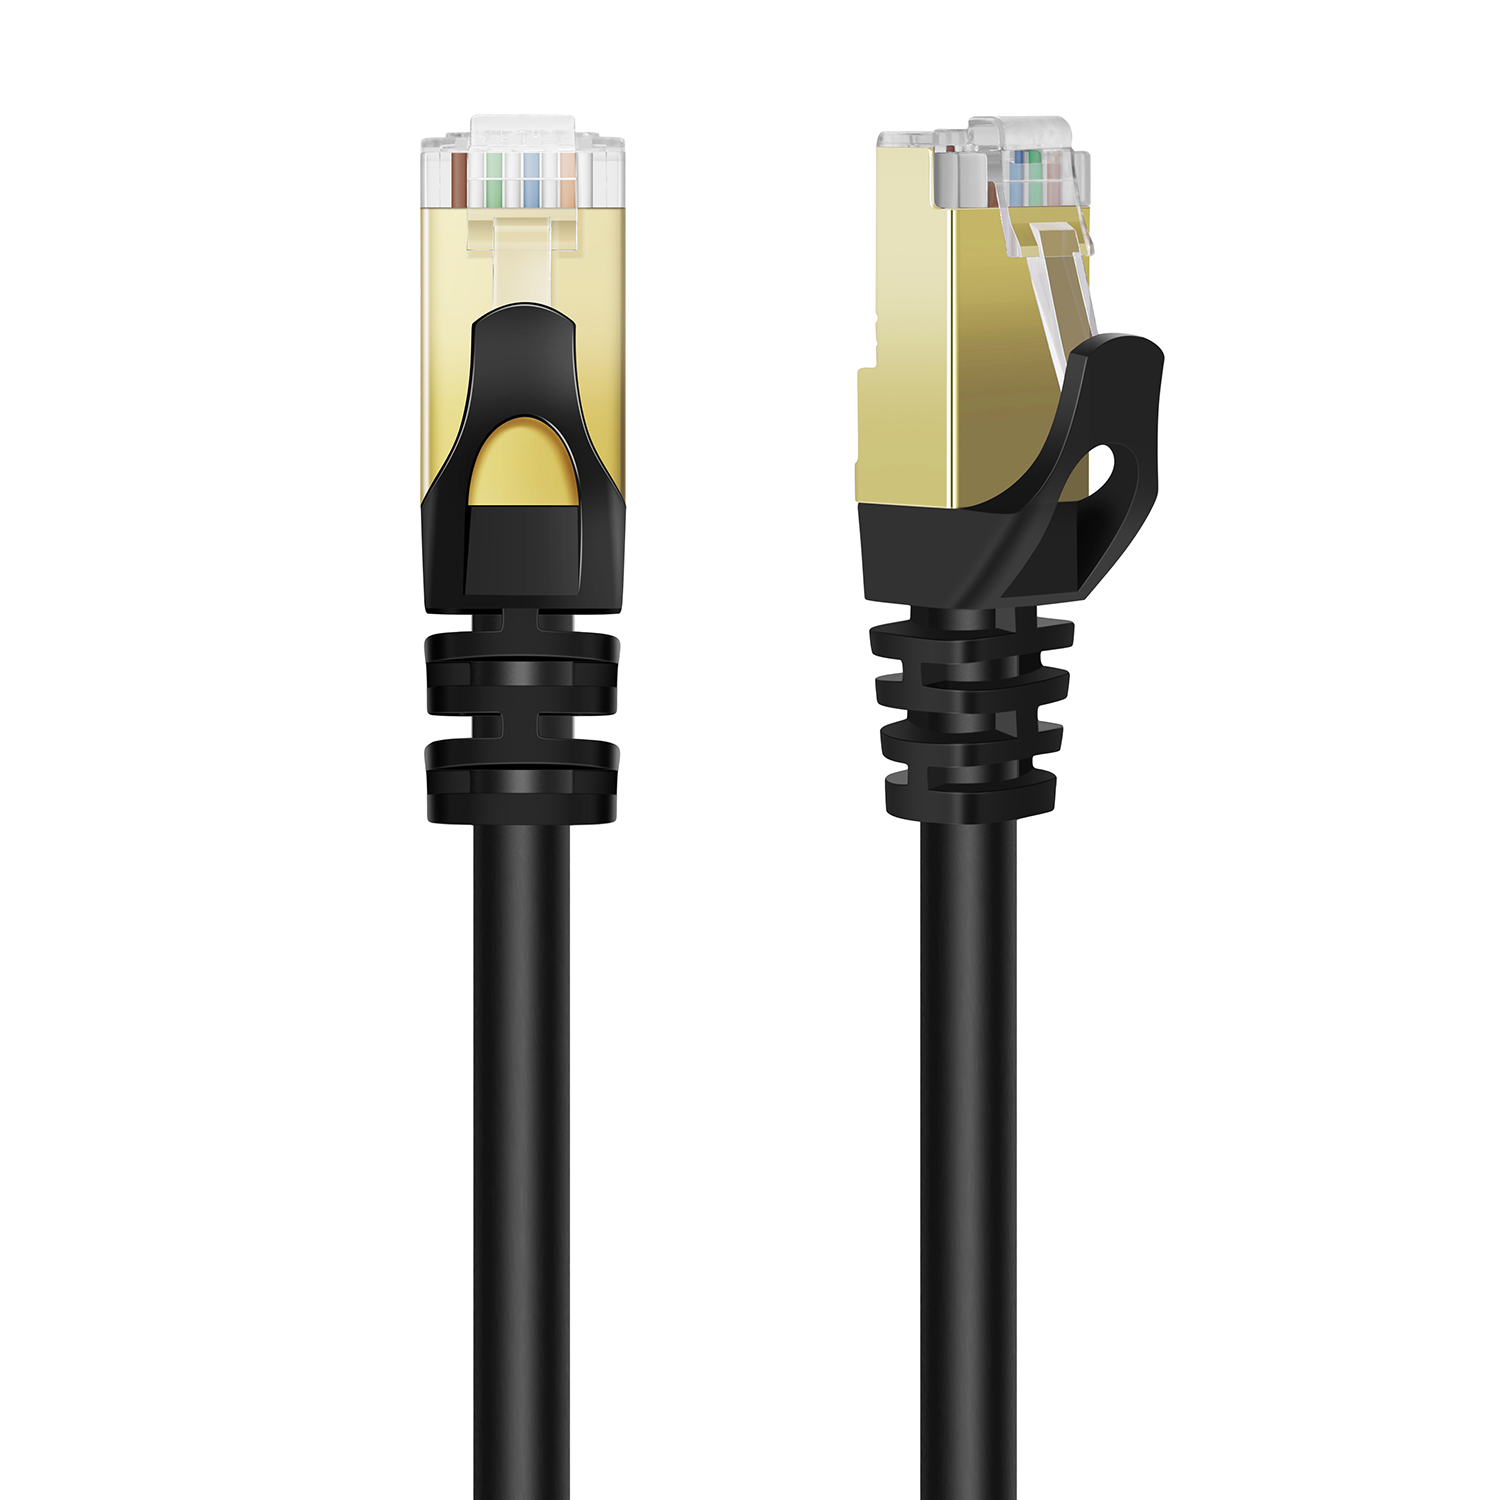 Premium & Quality materials - Solid 24 AWG copper filaments compose the patch cable cord's signal conductors. The twisted pairs are then separated by PE insulation molding that prevents internet cable signal interference. The cable's also gold-plated and made with a molded strain relief